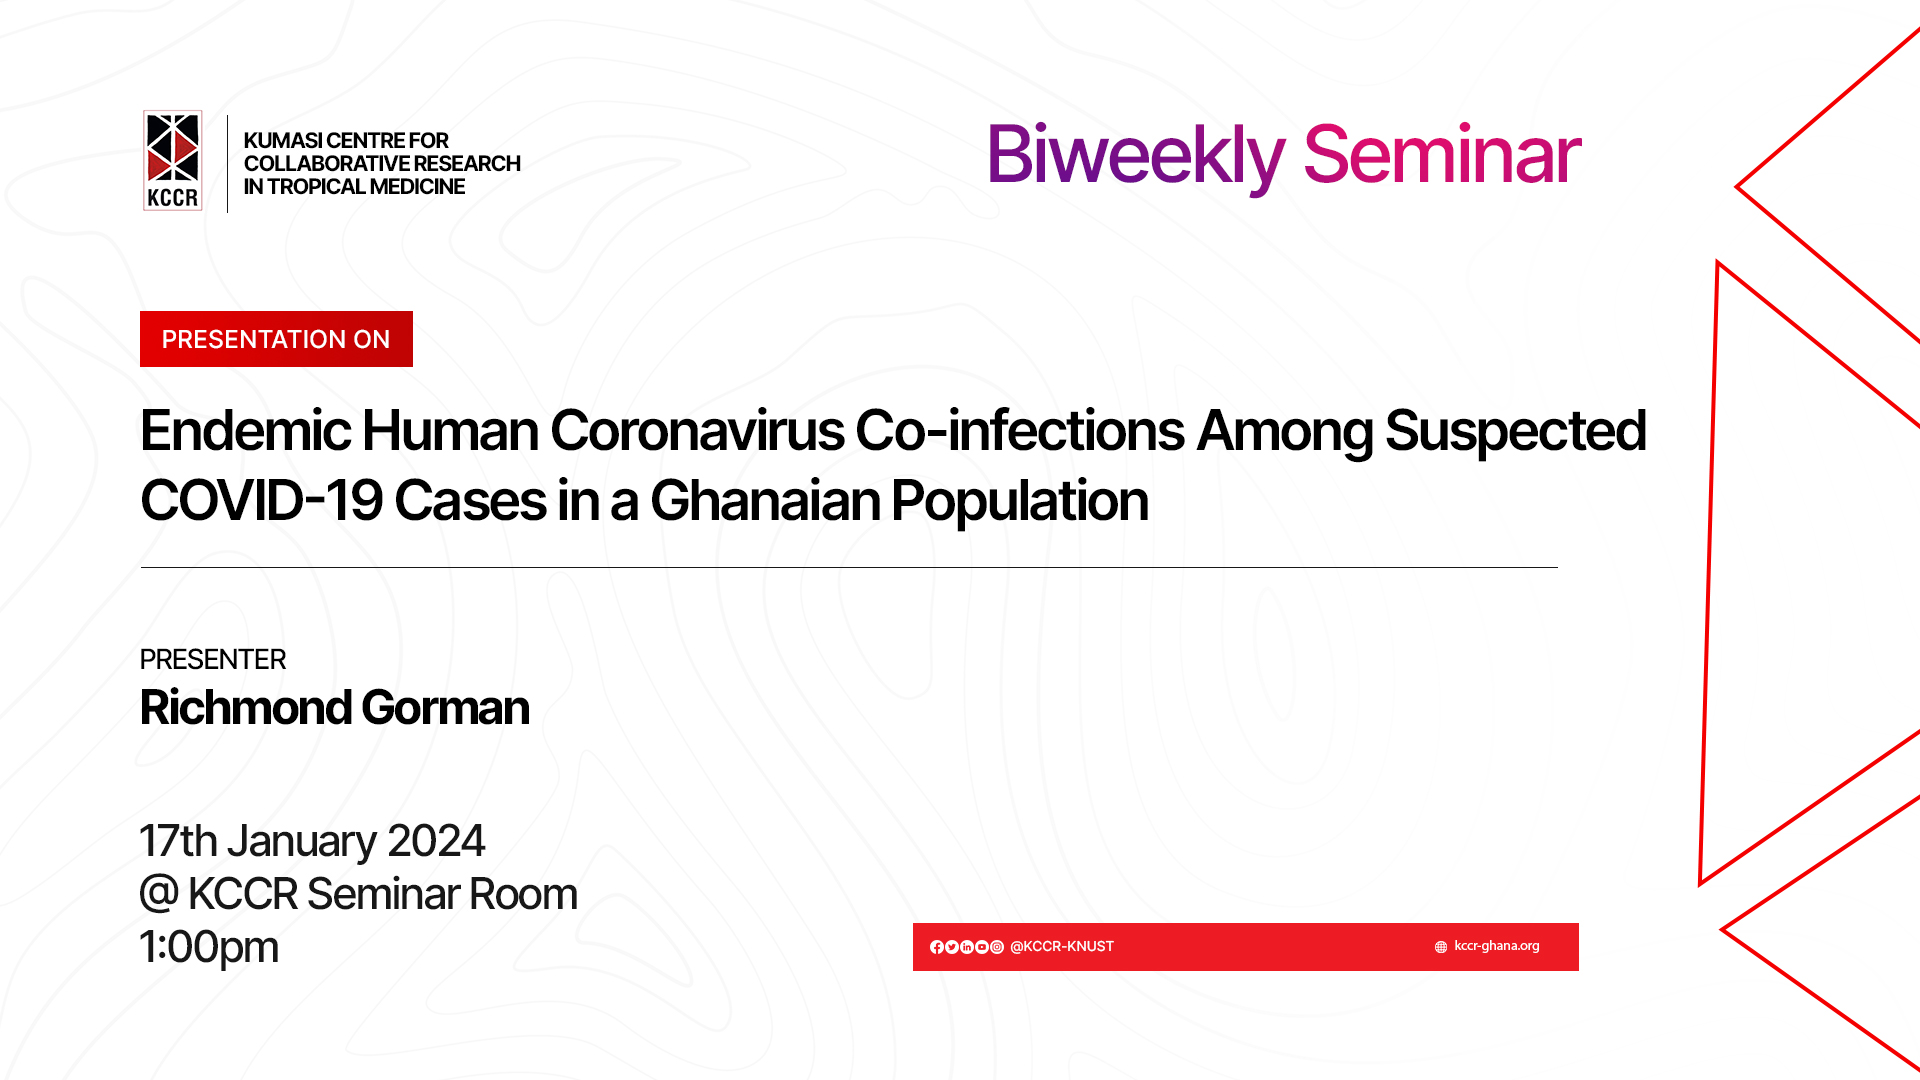 Presentation on Endemic Human Coronavirus Co-infections Among Suspected COVID-19 Cases in a GhanaianPopulation